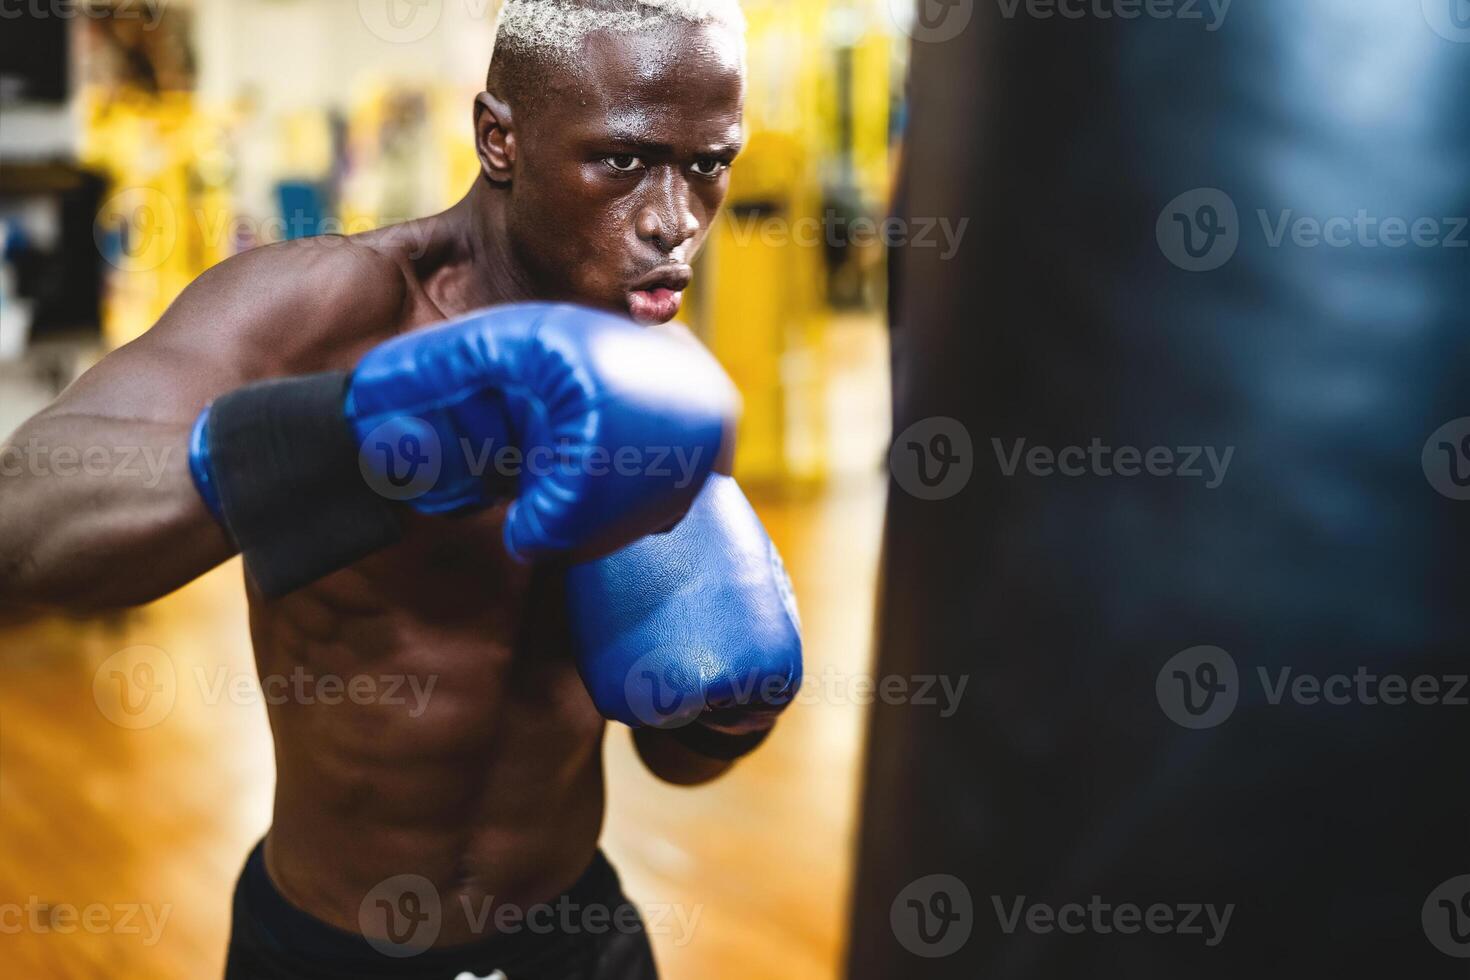 Man boxer training hard - Young black guy boxing in sport gym center club - Health fitness and sporty activity concept photo